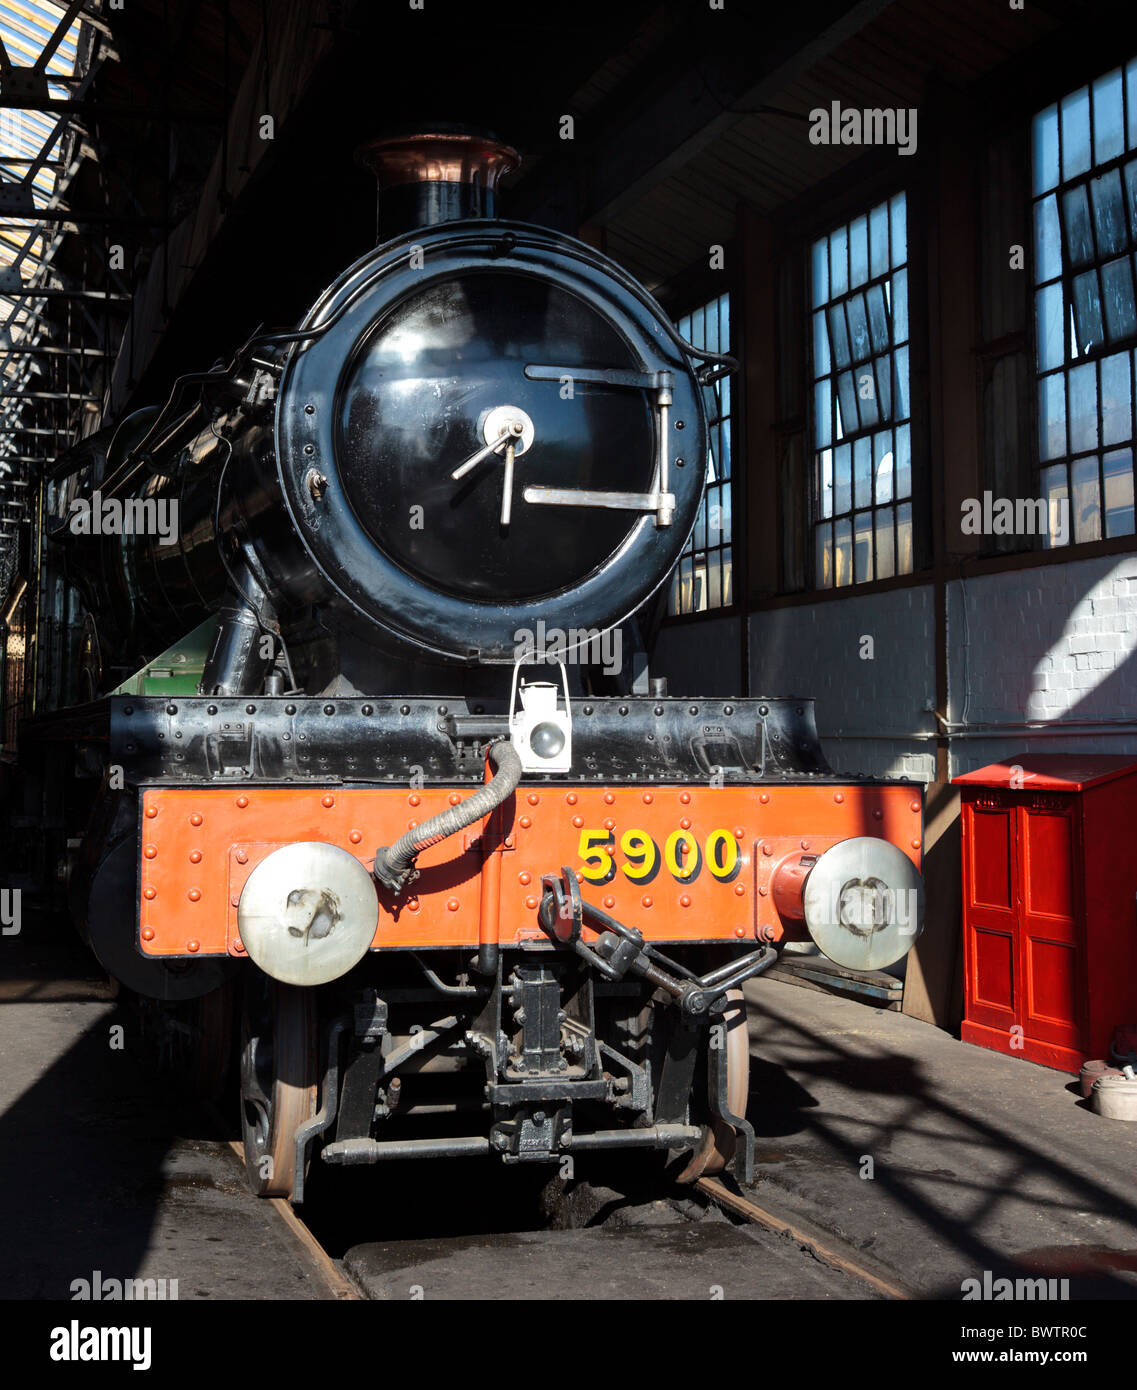 Great Western Railway (GWR) steam locomotive 5900 Hinderton Hall in the engine shed at Didcot Railway Centre Stock Photo